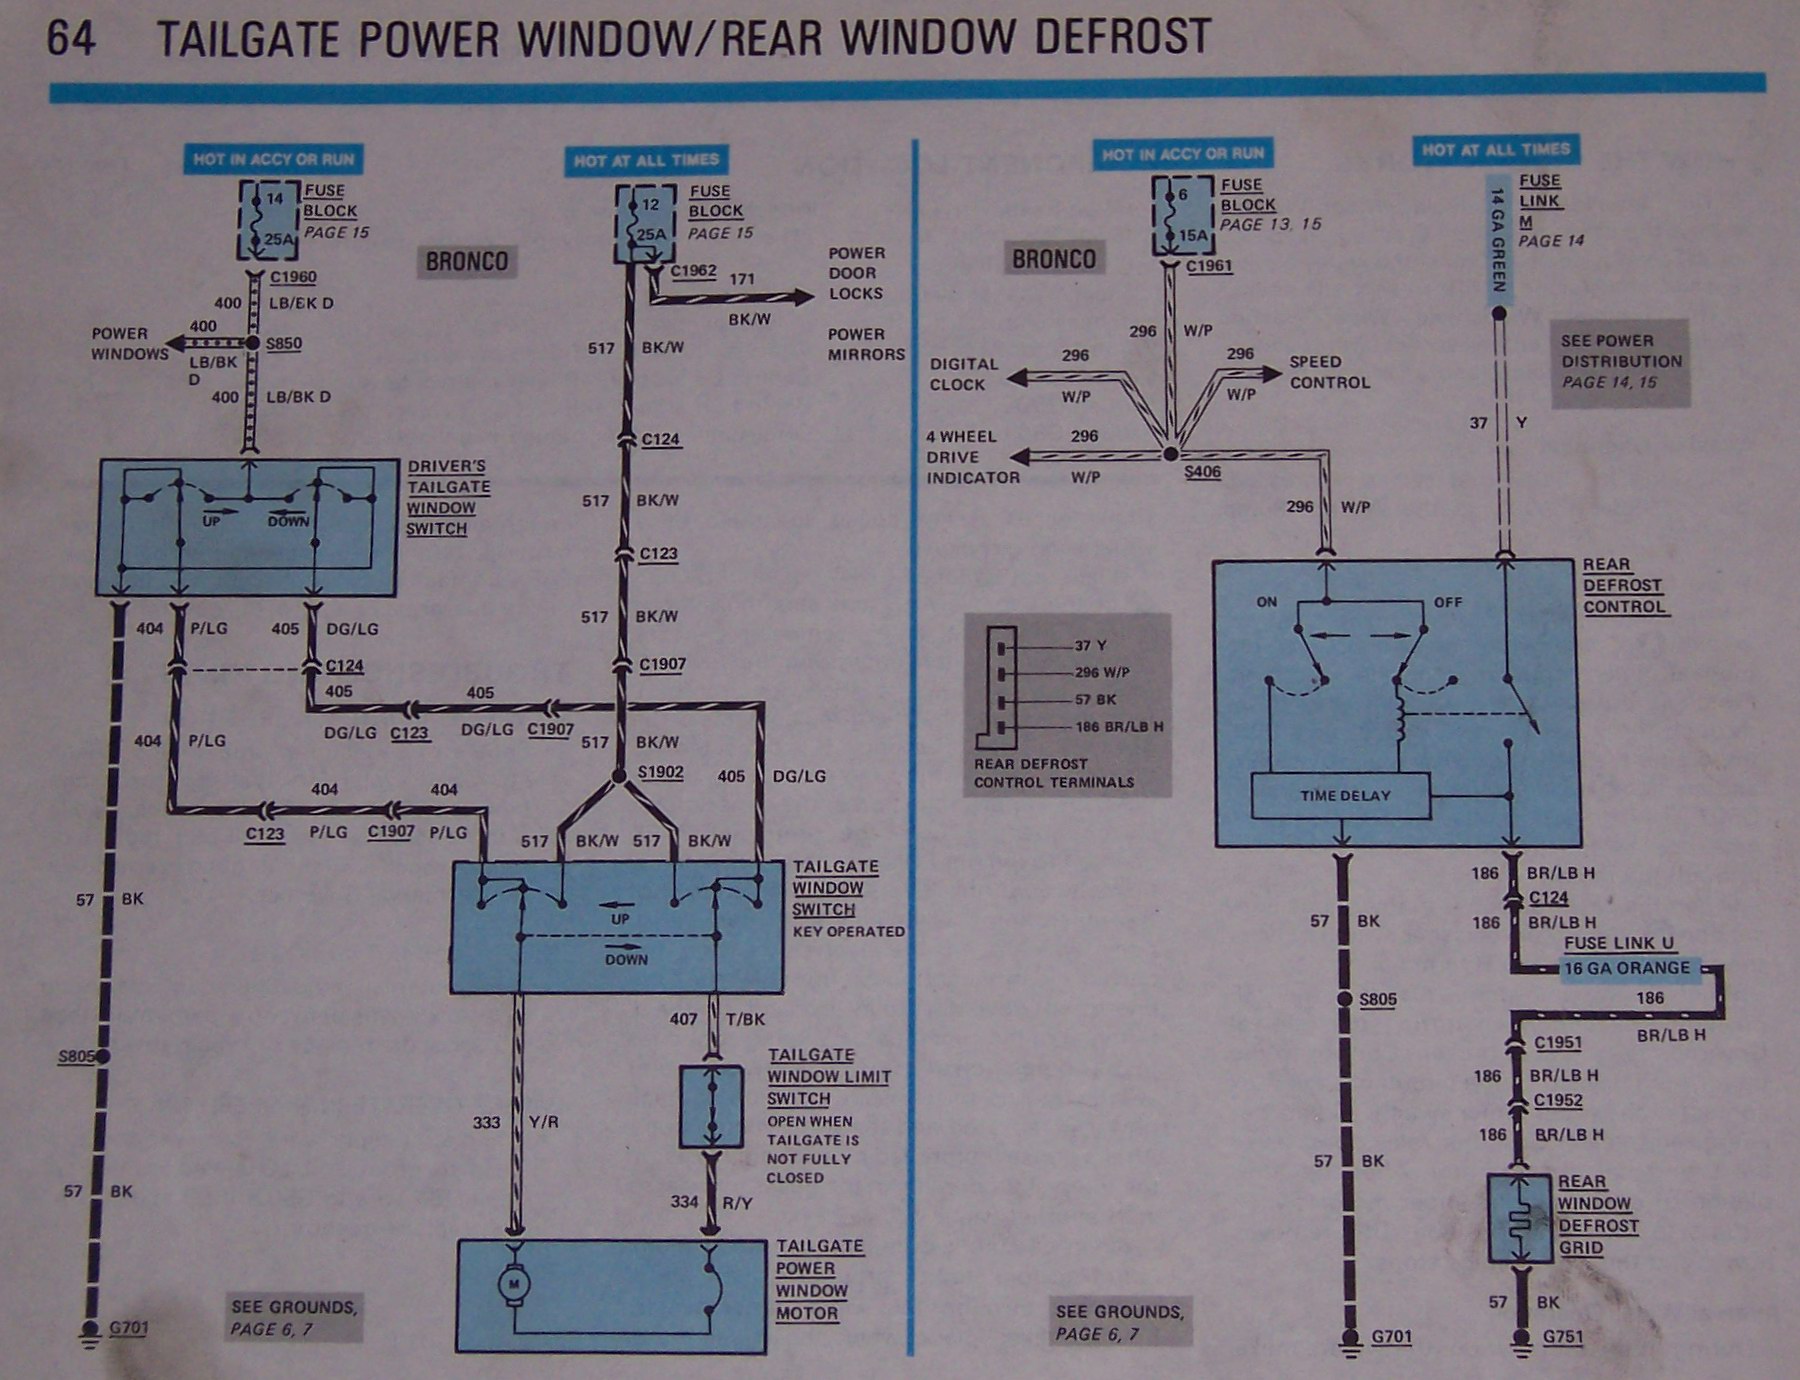 Wiring diagram needed!! helps - 78-79 Ford Bronco - 66-96 Ford Bronco